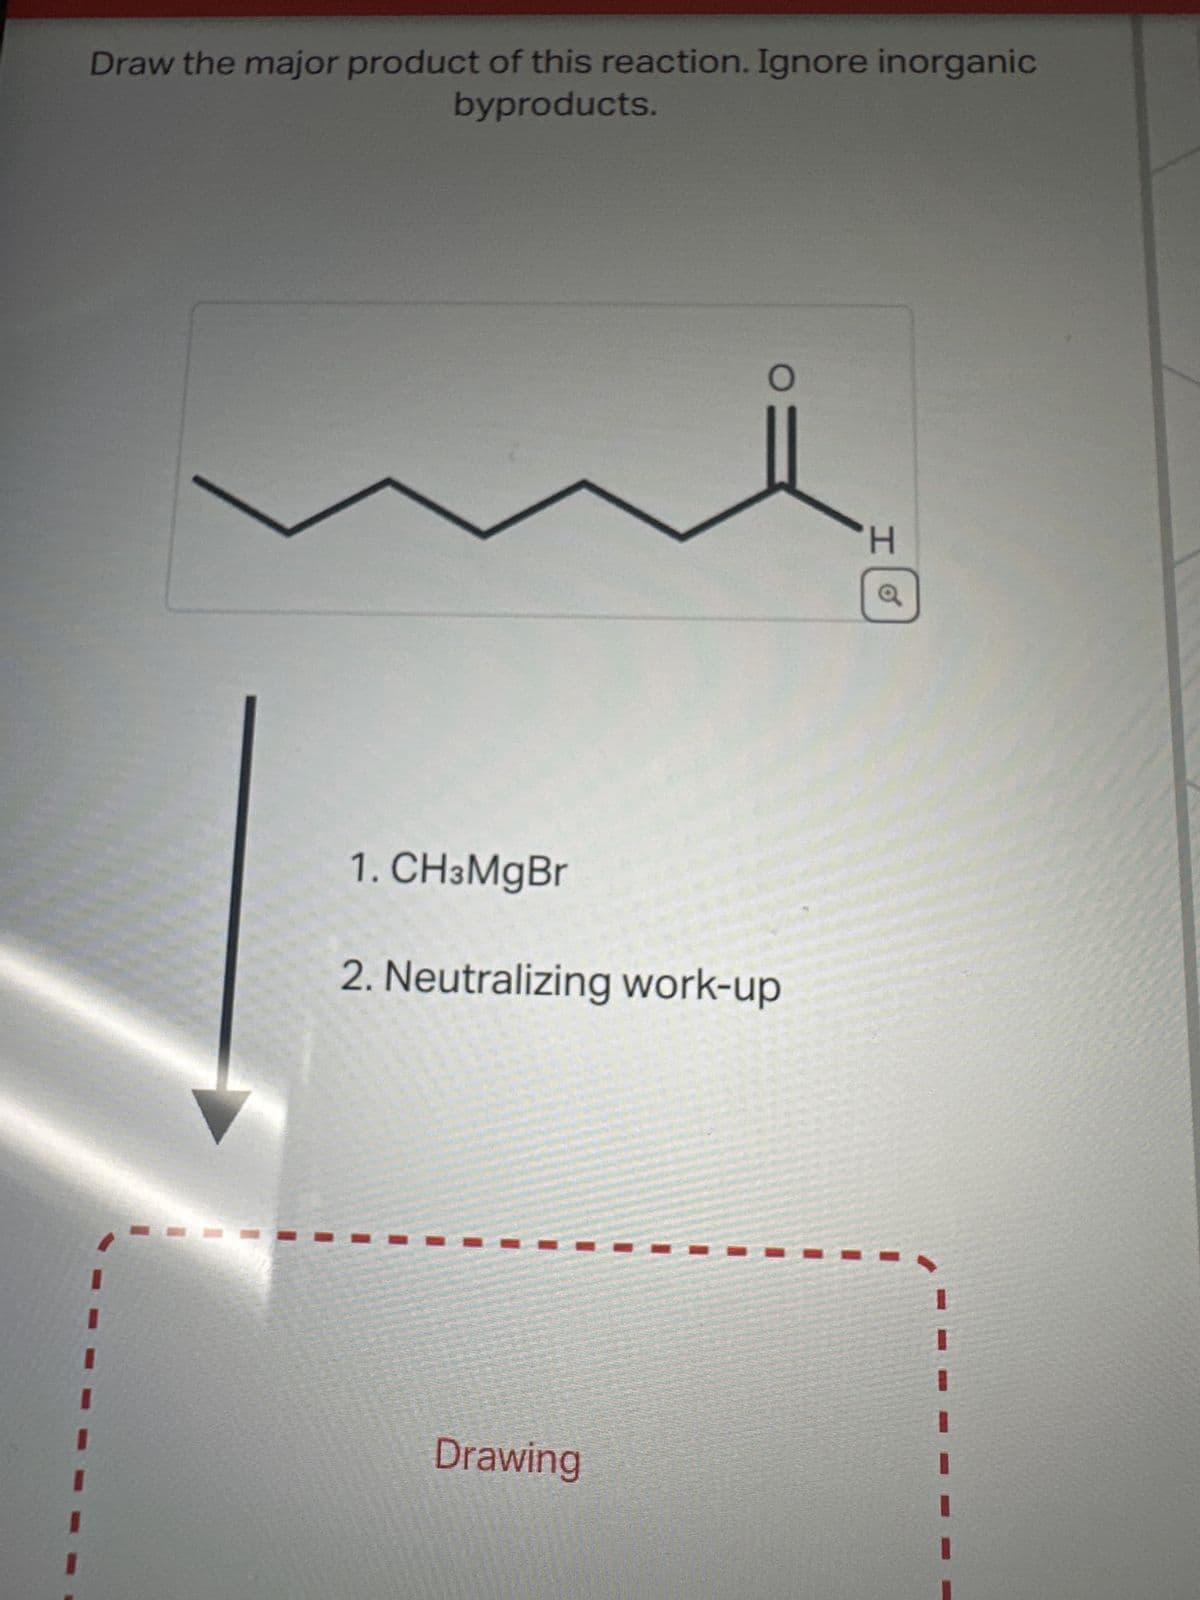 Draw the major product of this reaction. Ignore inorganic
byproducts.
Taken
O
1. CH3MgBr
2. Neutralizing work-up
Drawing
H